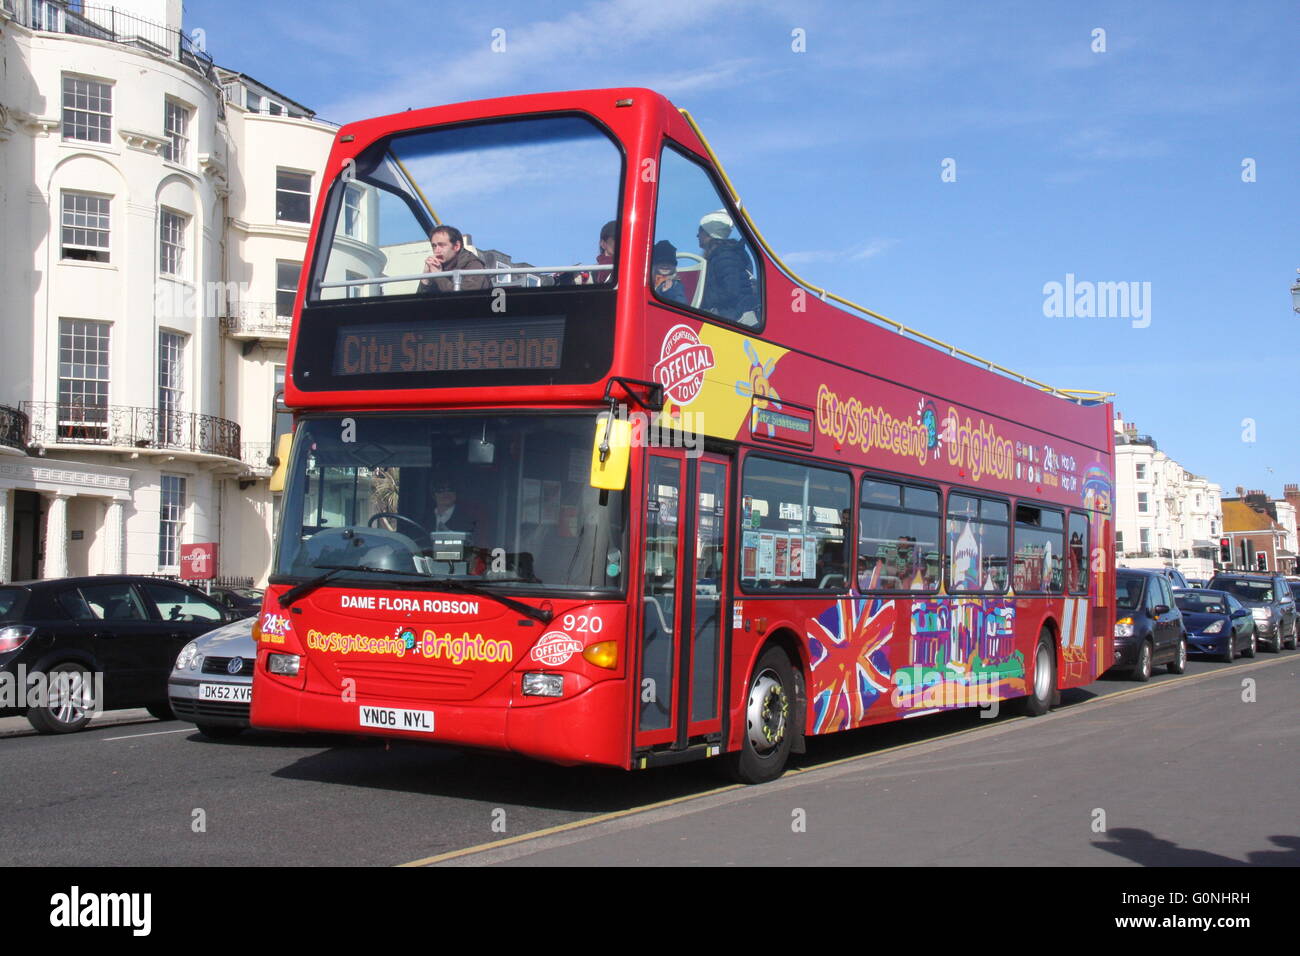 A DOUBLE DECK OPEN TOP RED BRIGHTON SIGHTSEEING TOUR BUS Stock Photo